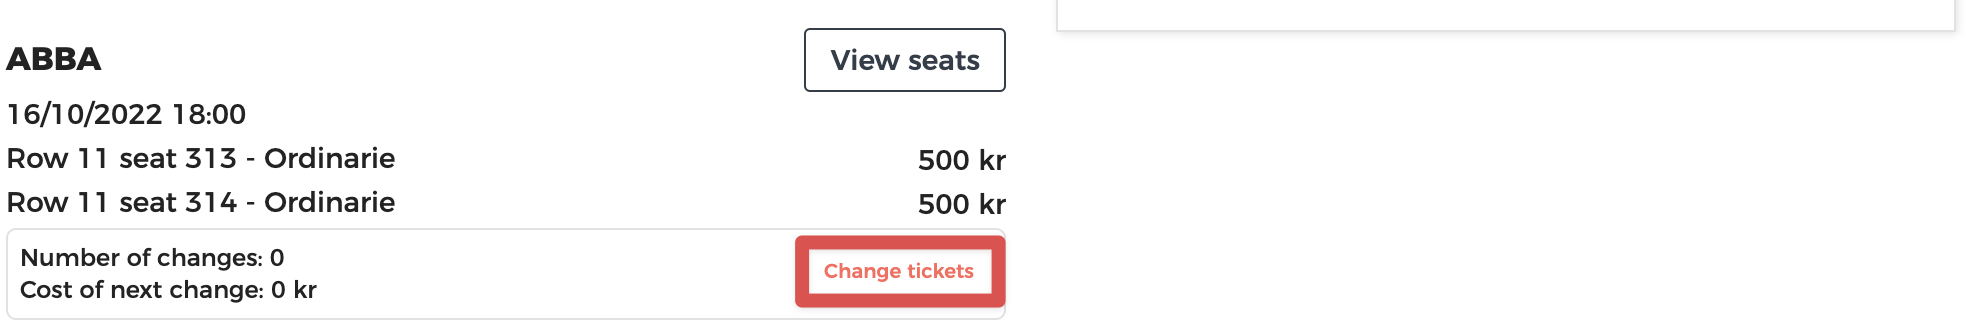 chancetickets2.png